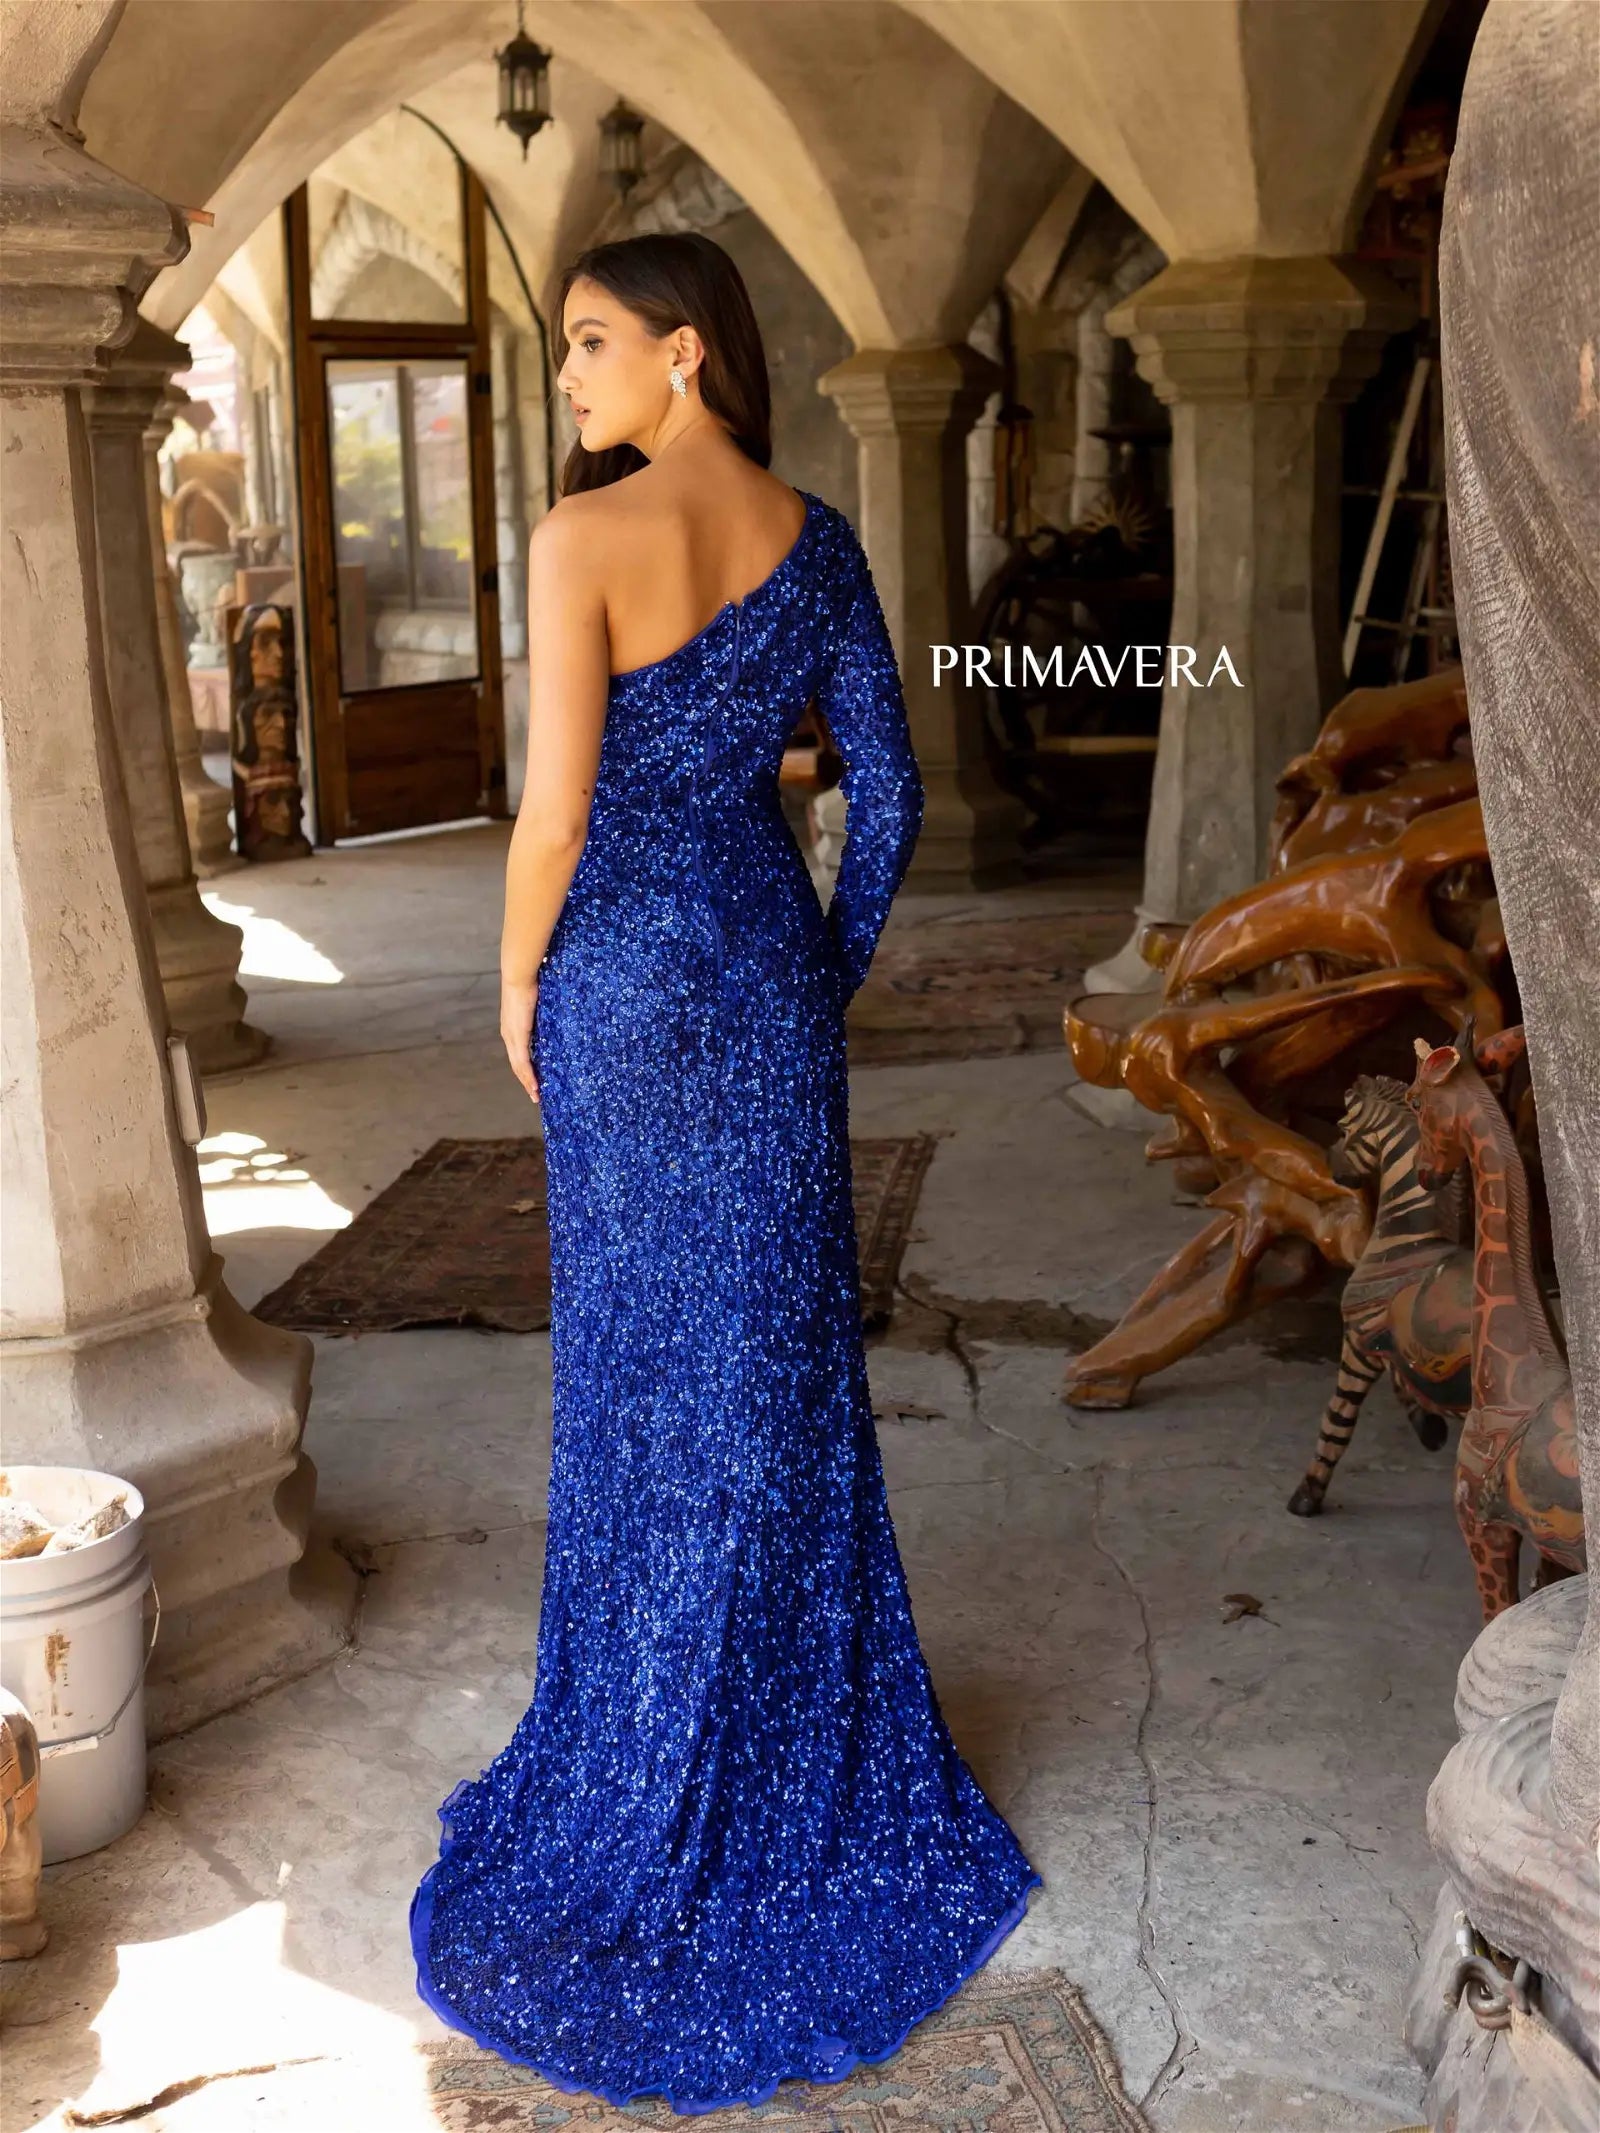 Primavera Couture 3942 Prom Dress Long Beaded Gown. This Gown has such a beautiful slit plus a long sleeve.